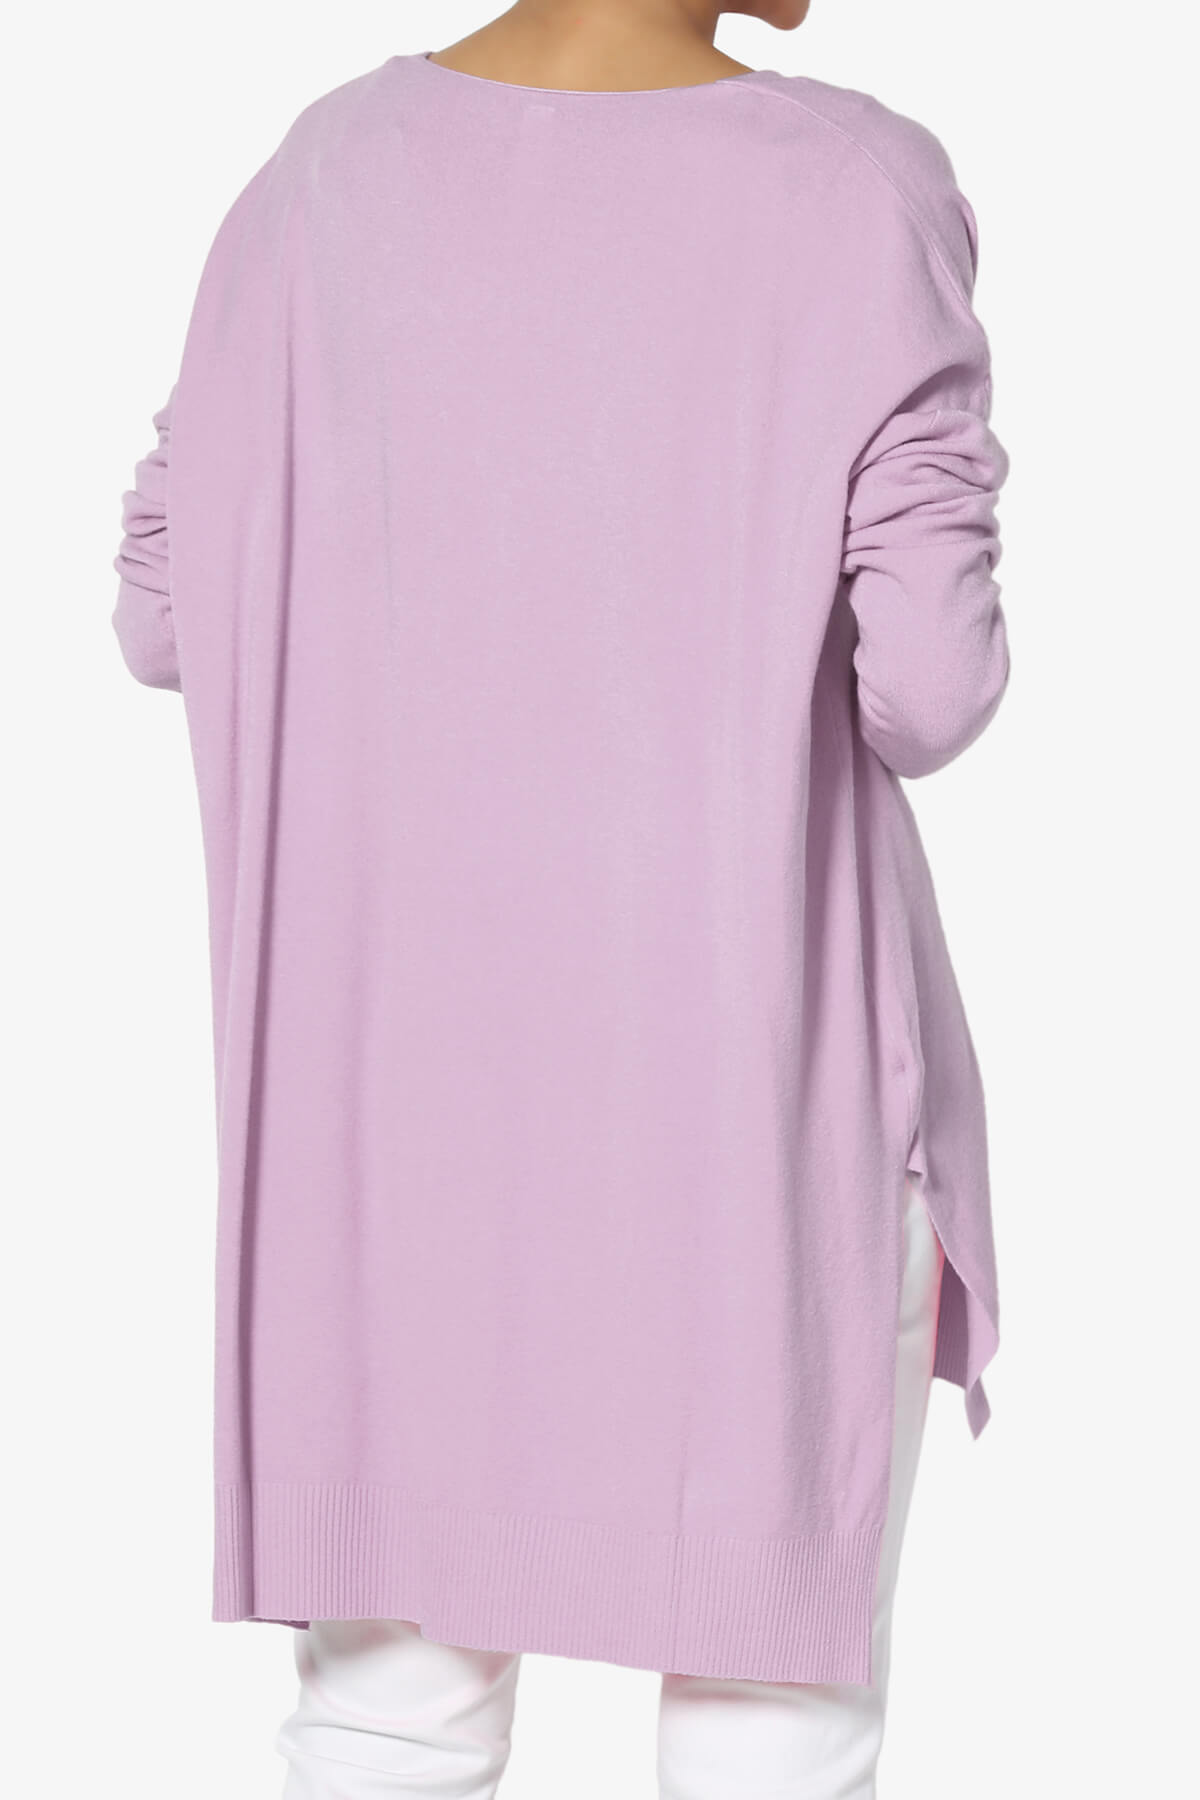 Load image into Gallery viewer, Katana Front Seam V-Neck Knit Sweater DUSTY LAVENDER_2
